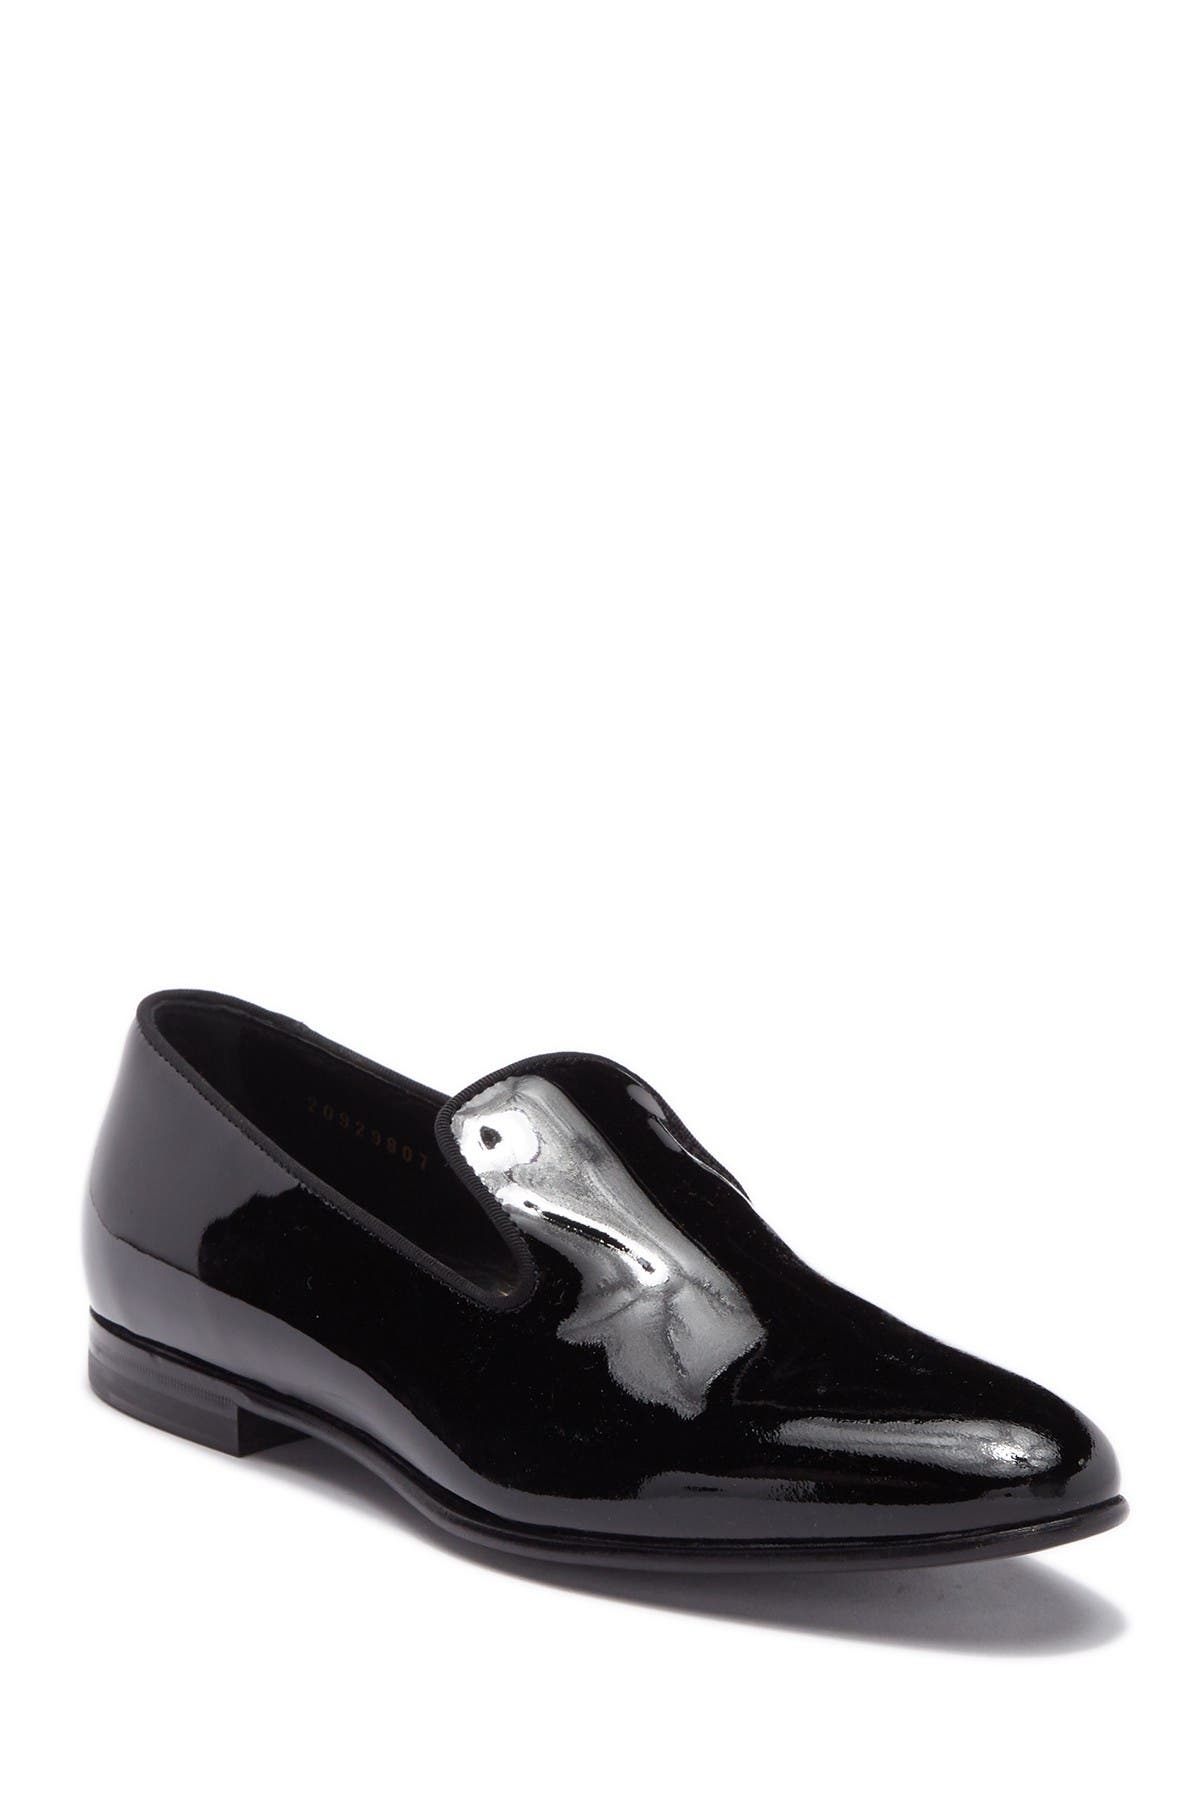 nordstrom patent leather shoes